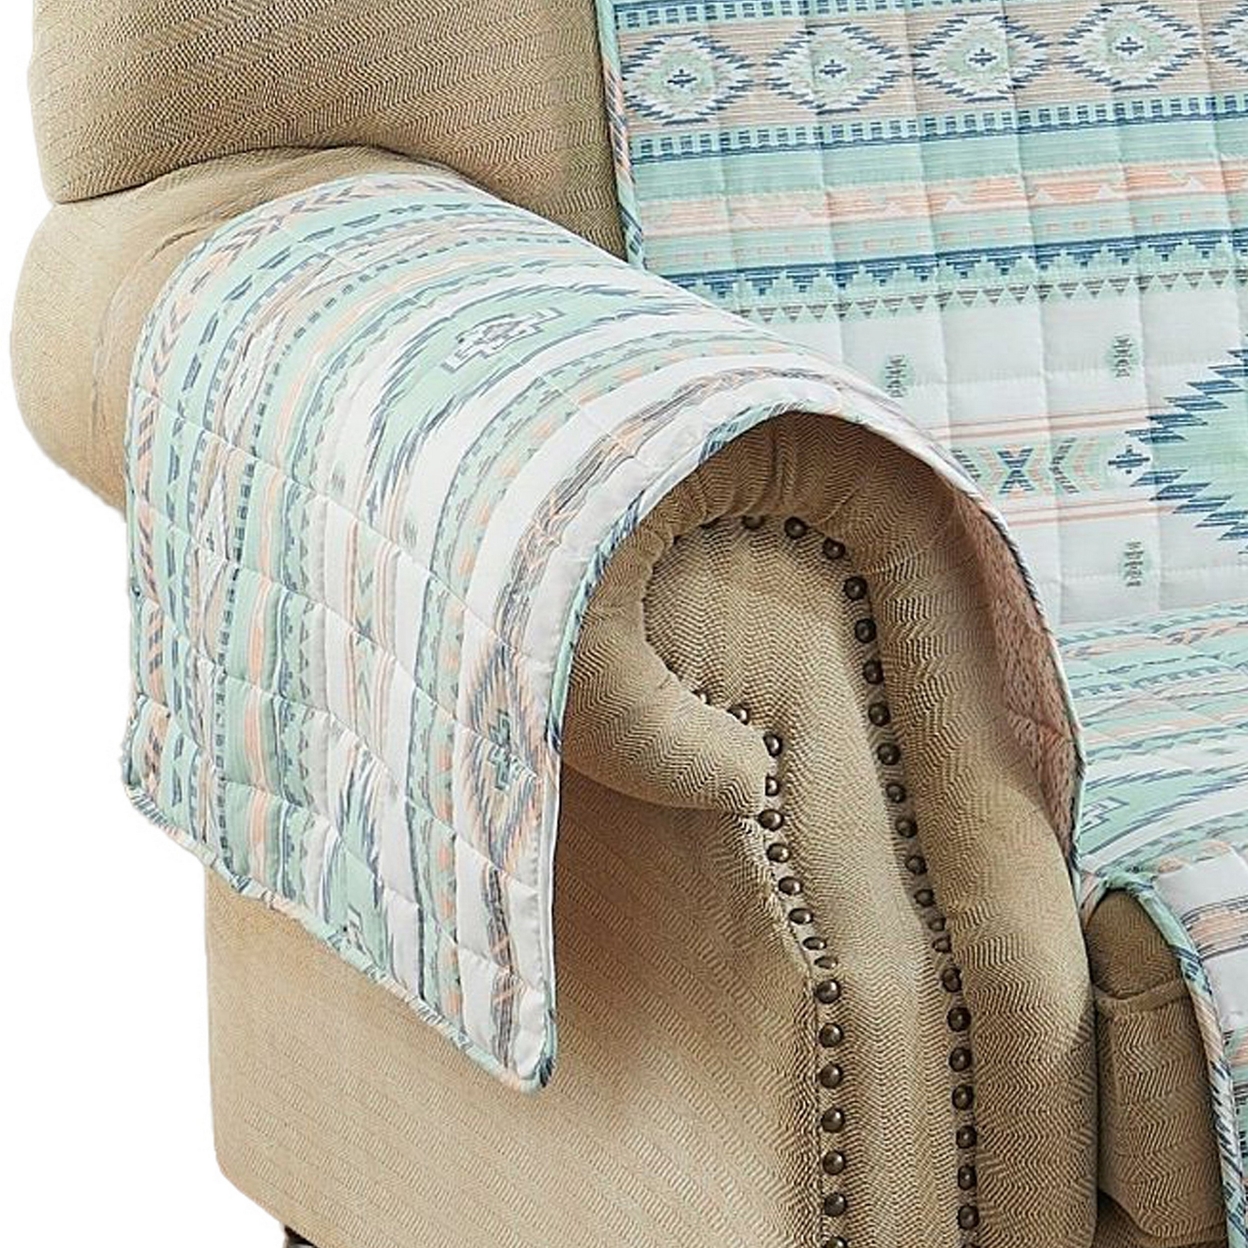 Linda 103 Inch Quilted Loveseat Cover, Geometric Print, Turquoise Polyester-Saltoro Sherpi